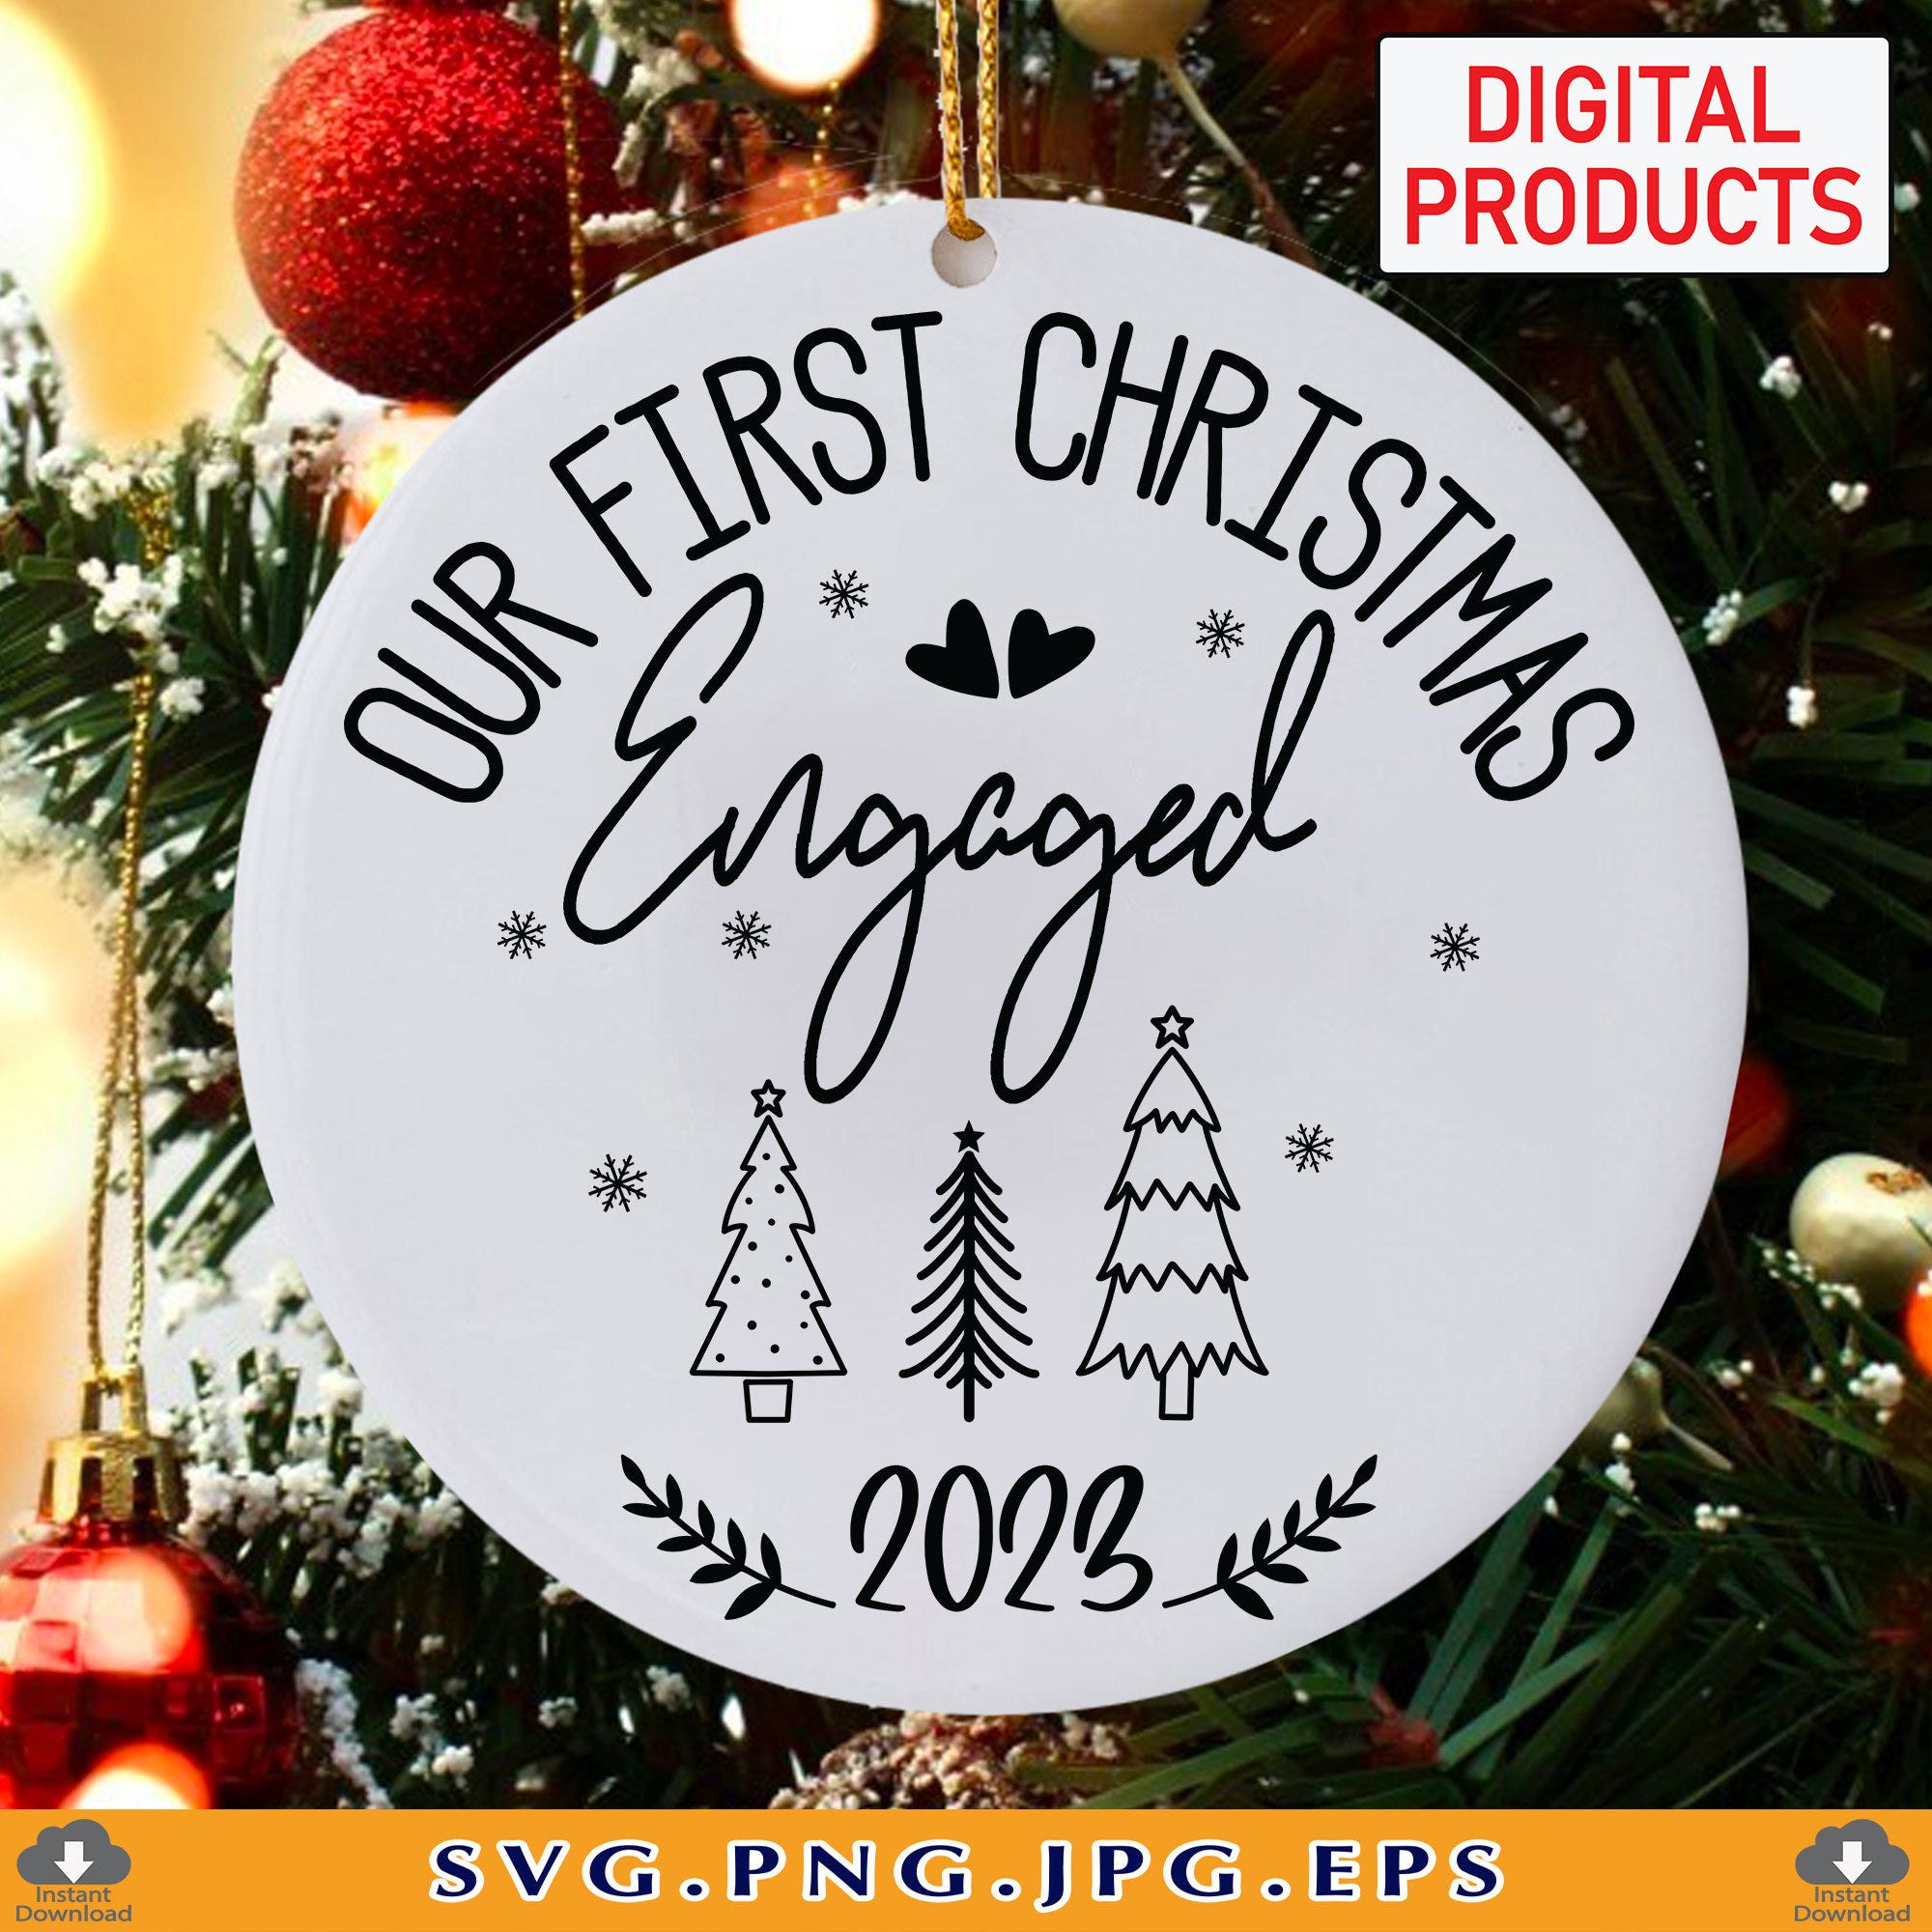 Our First Christmas Engaged 2023 SVG, Couples Christmas Gift SVG, Christmas Engagement Decor Ornament SVG, files for Cricut, Svg, Png